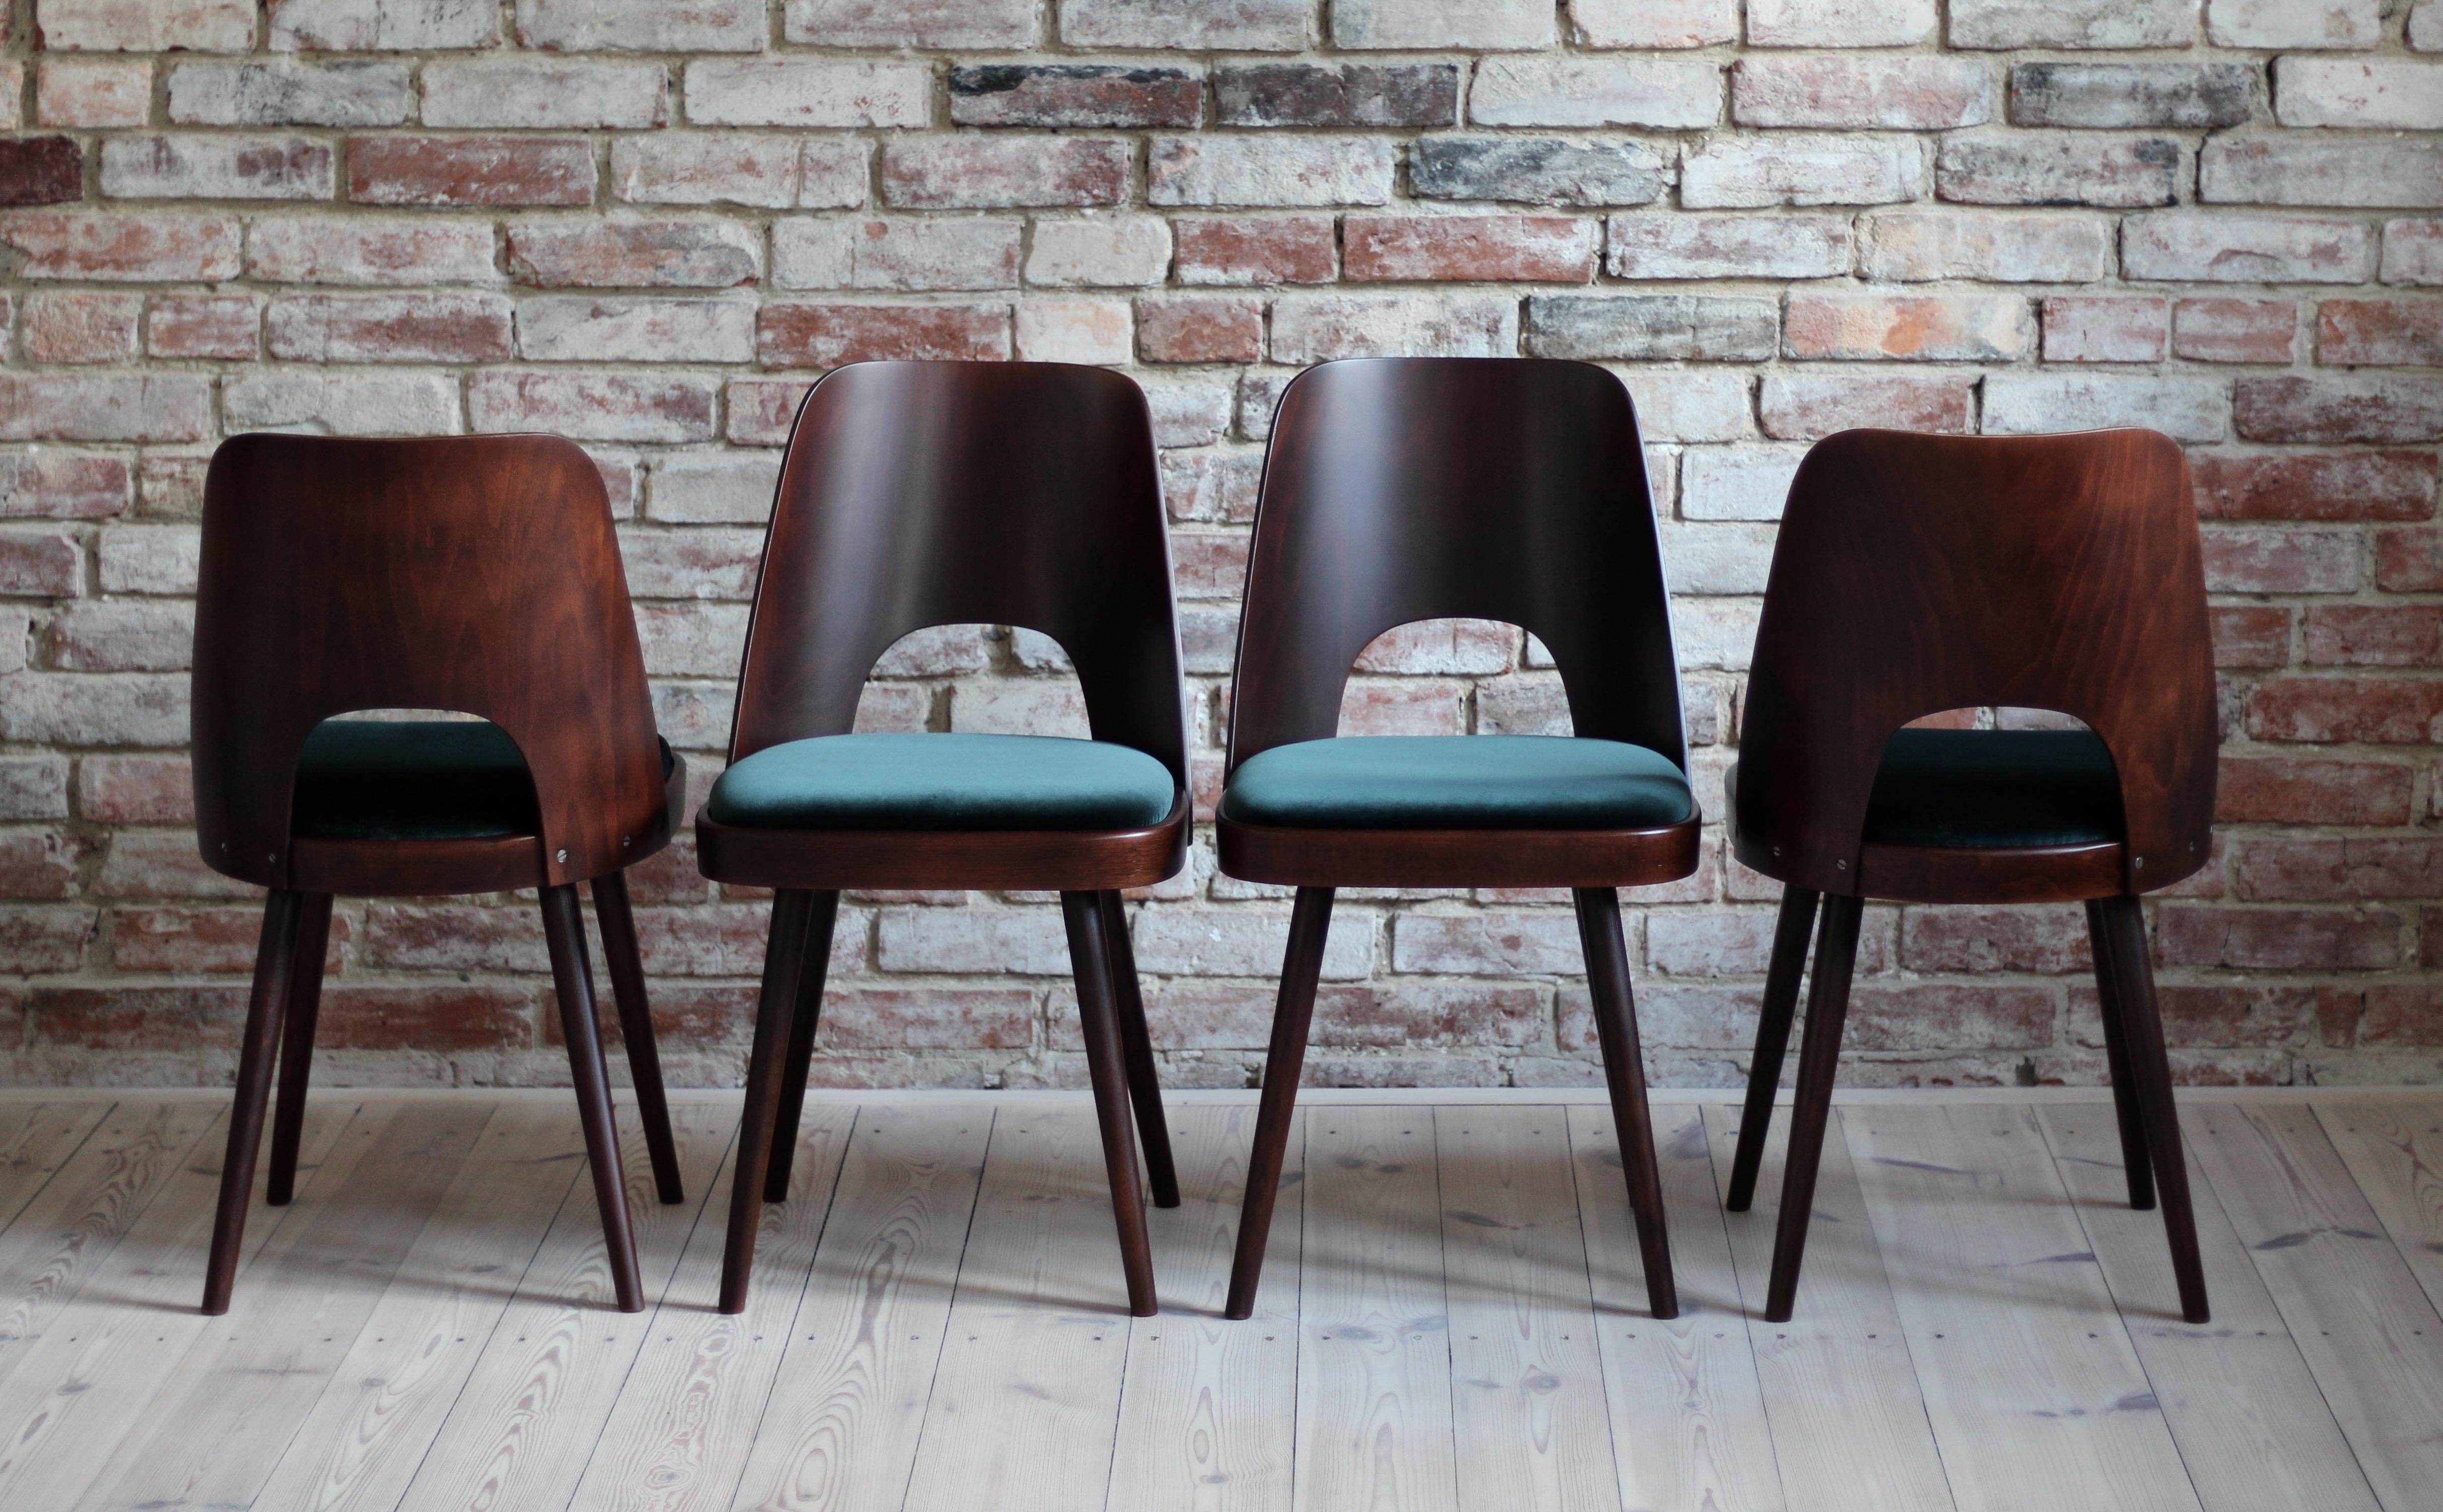 This set of four vintage dining chairs was designed by Oswald Haerdtl in the 1950s, famous Austrian designer - together with Mr. Josef Hoffmann he designed the cafe terrace at the Vienna Werkbund Exhibition of 1930, where they designed every little